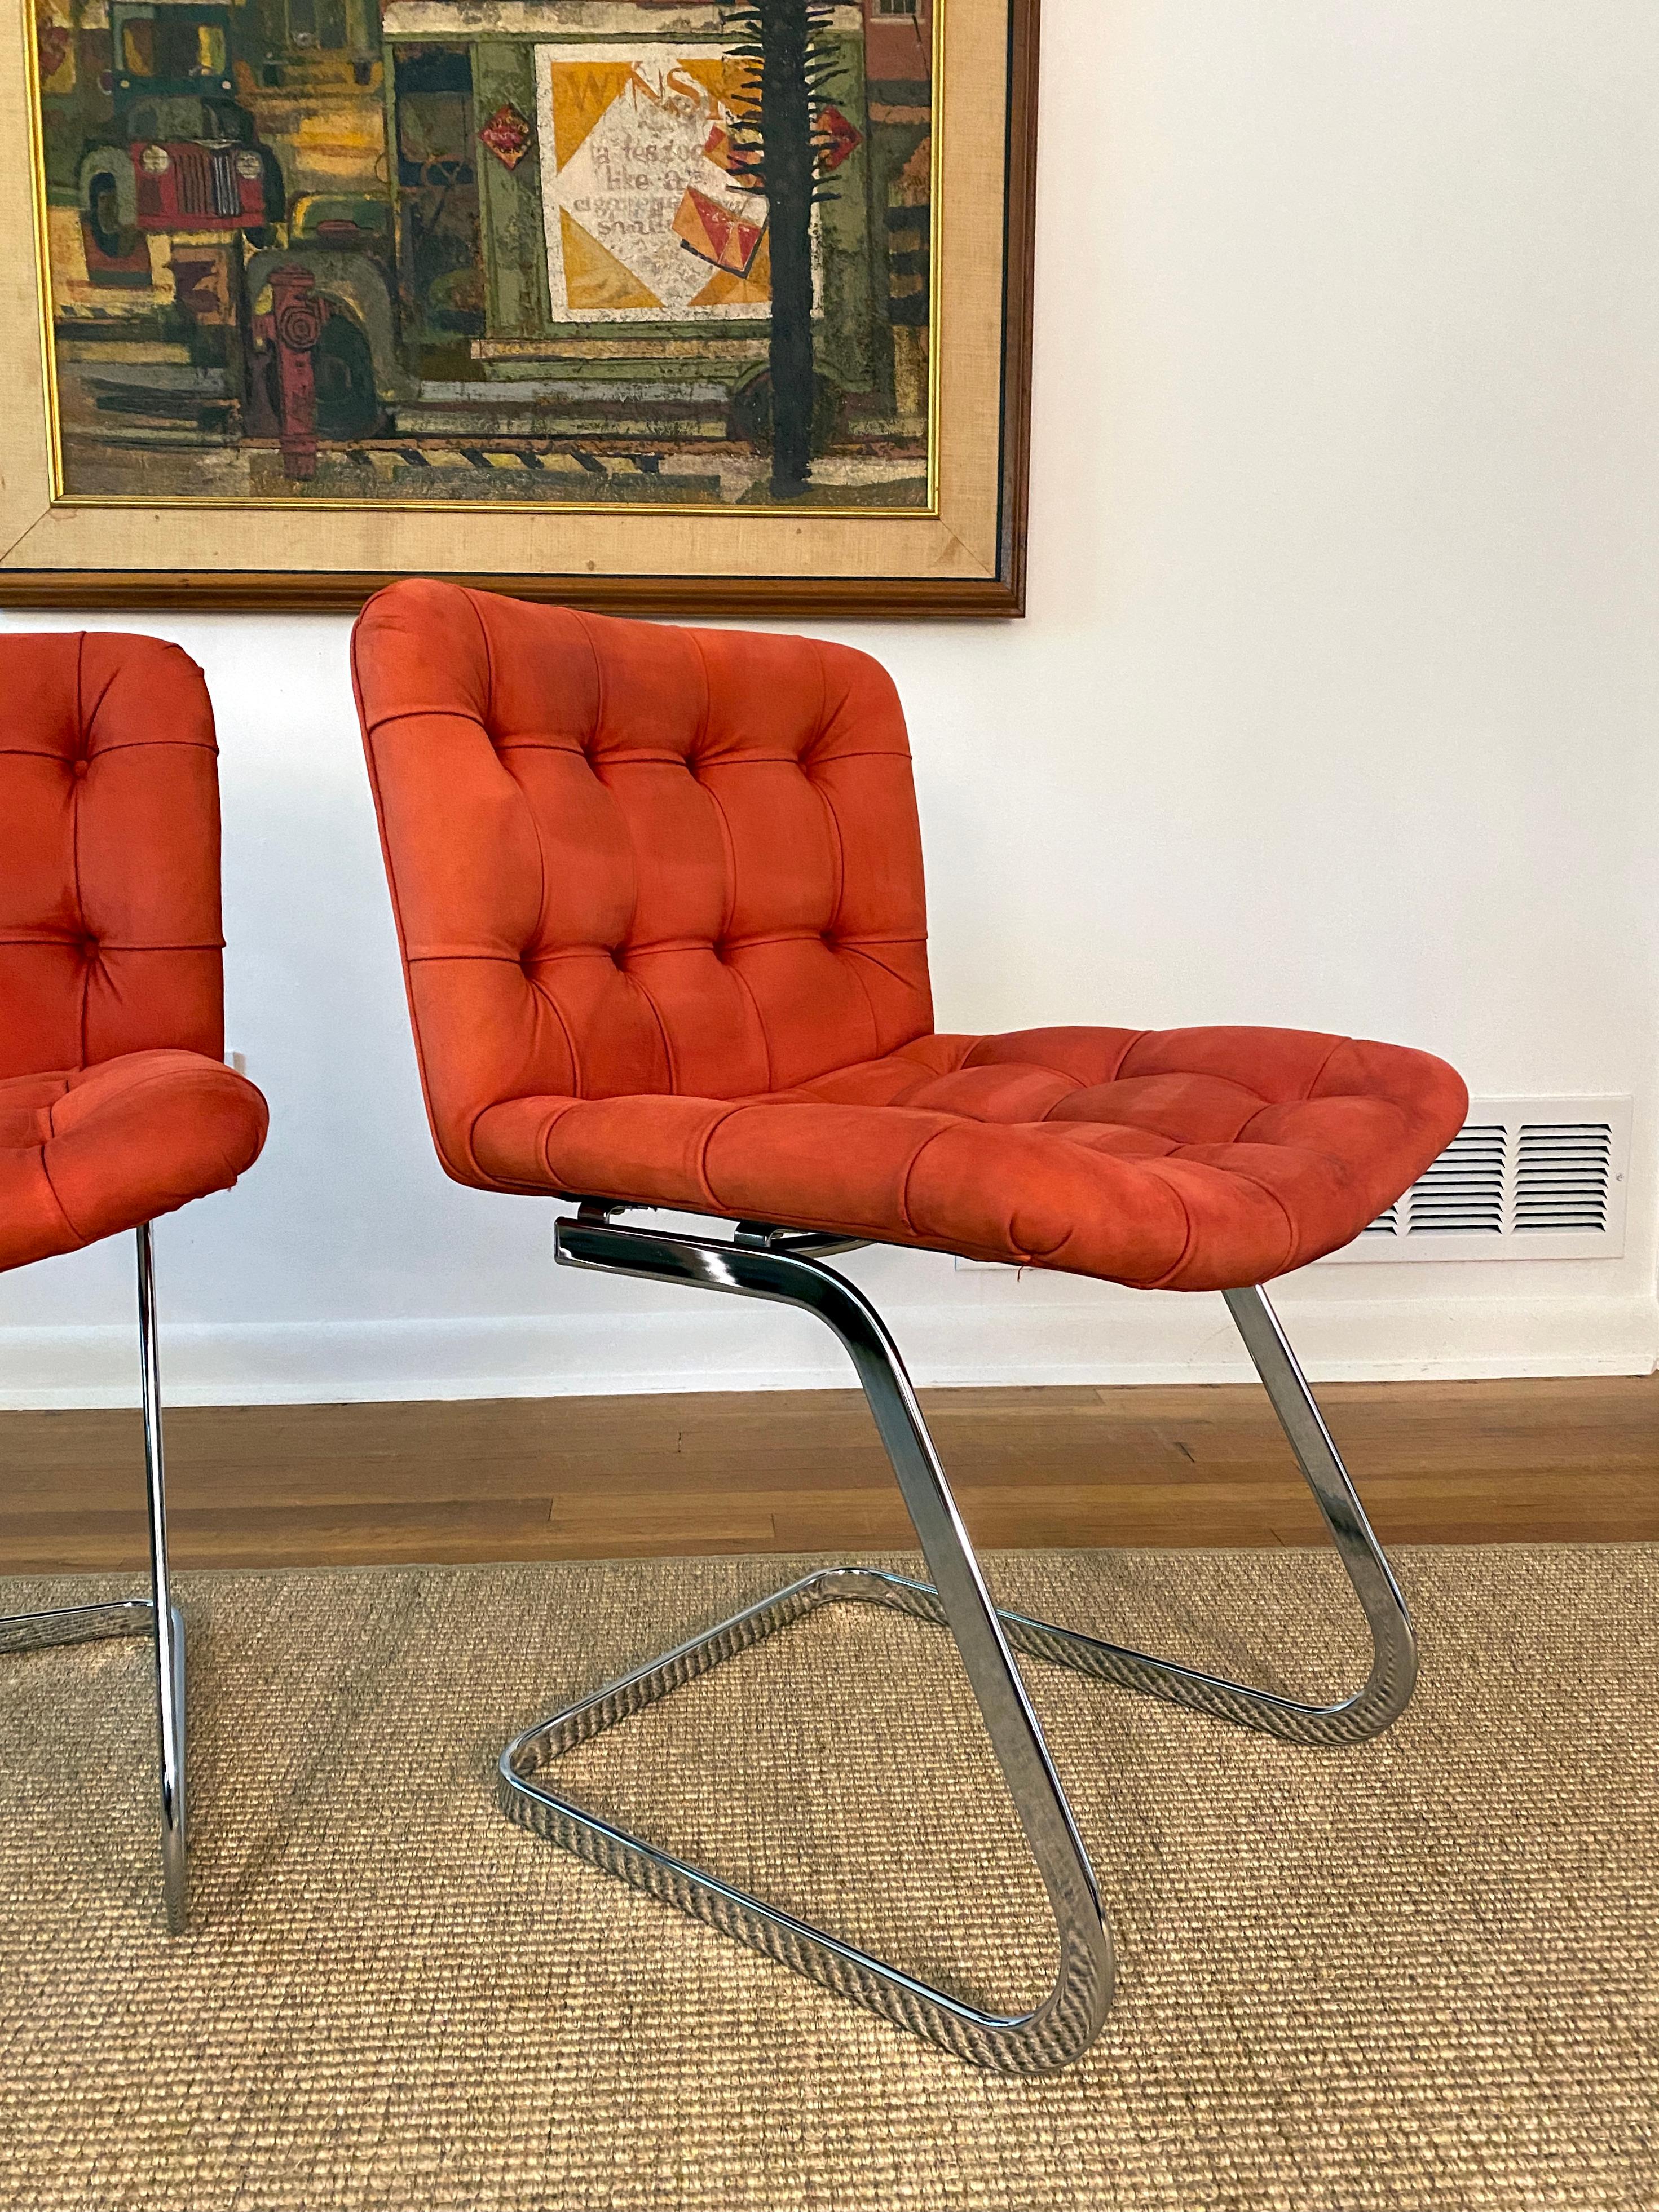 Swiss Pair Suede Leather Cantilever Chairs Designed By Robert Haussmann For de Sede For Sale